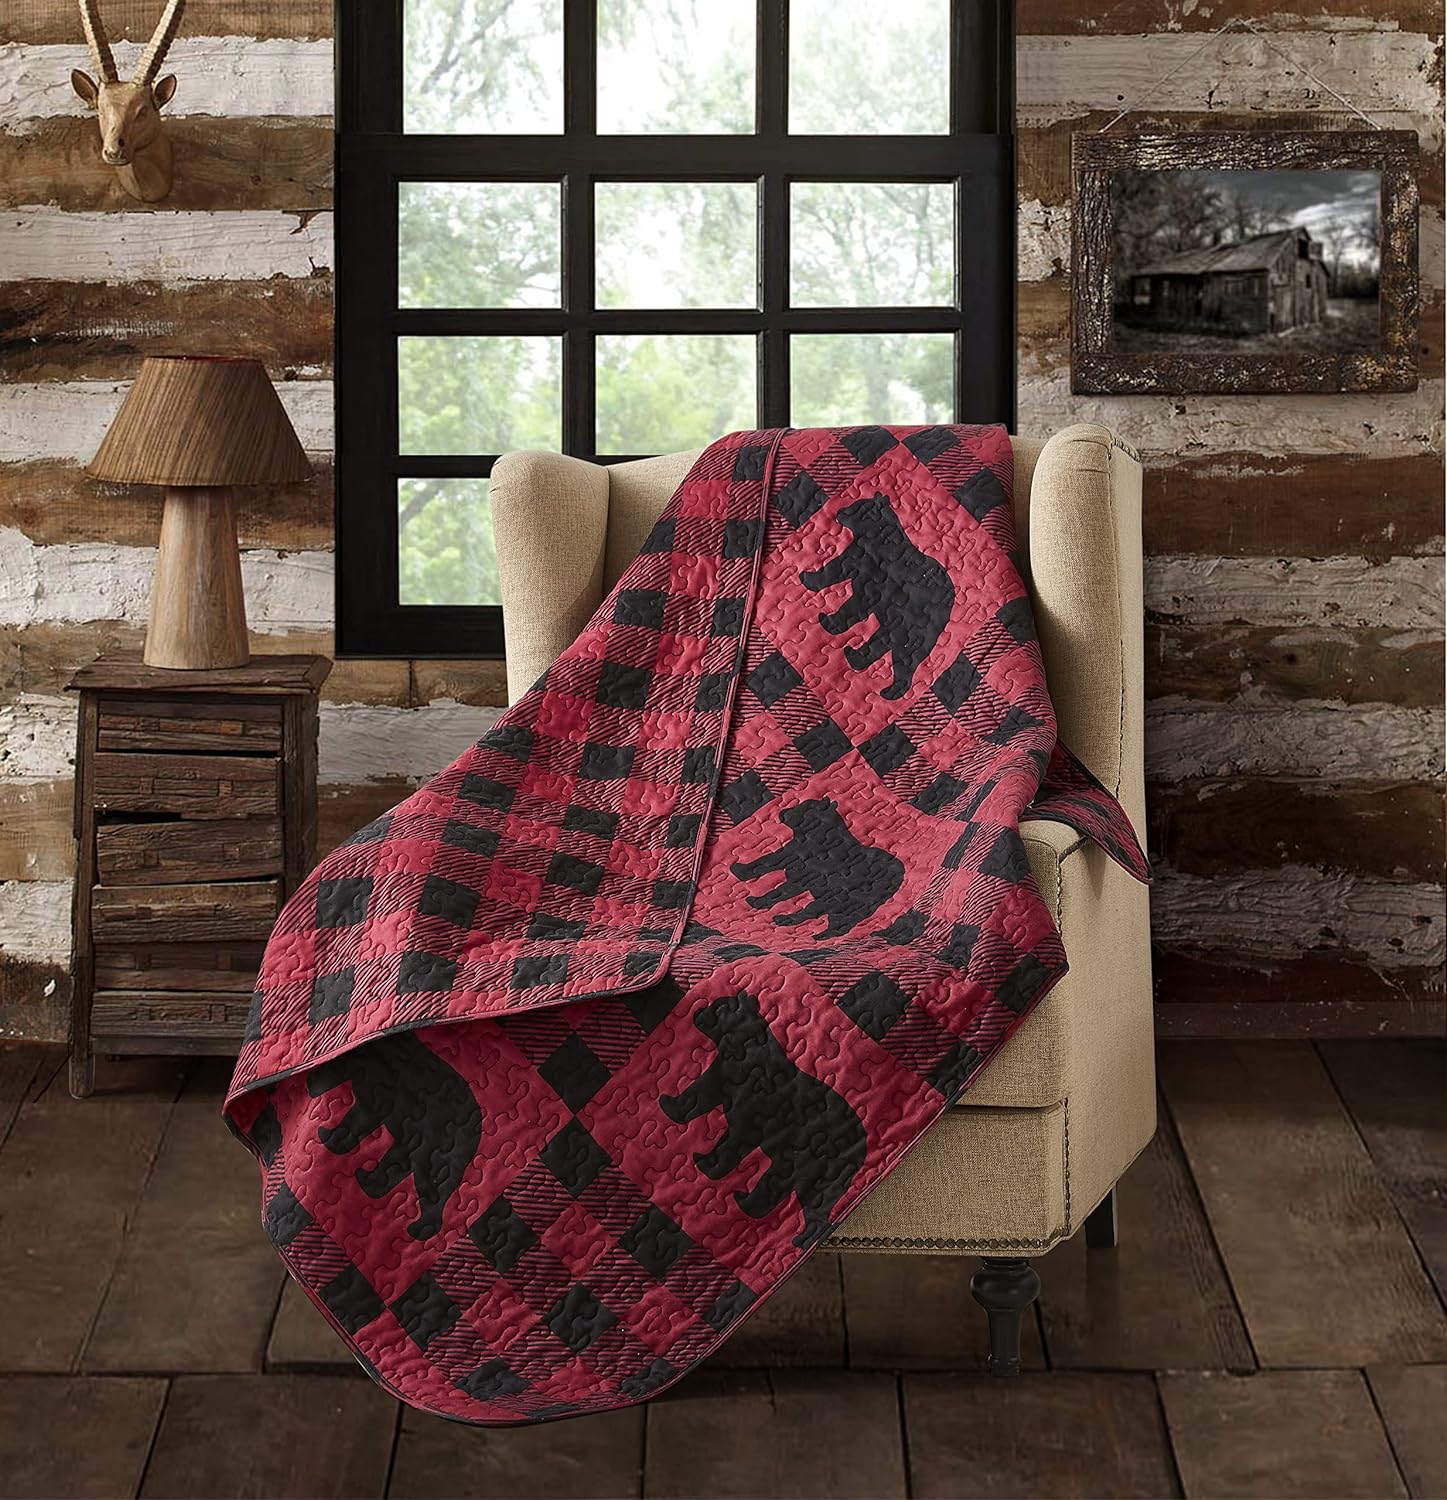 Virah Bella Quilted Throw Blanket 50" x 60" Buffalo Plaid Rustic Black Bear Lightweight Throw Quilt Great for Loungers & Extra Bedding - Beautiful Lodge-Themed Blanket